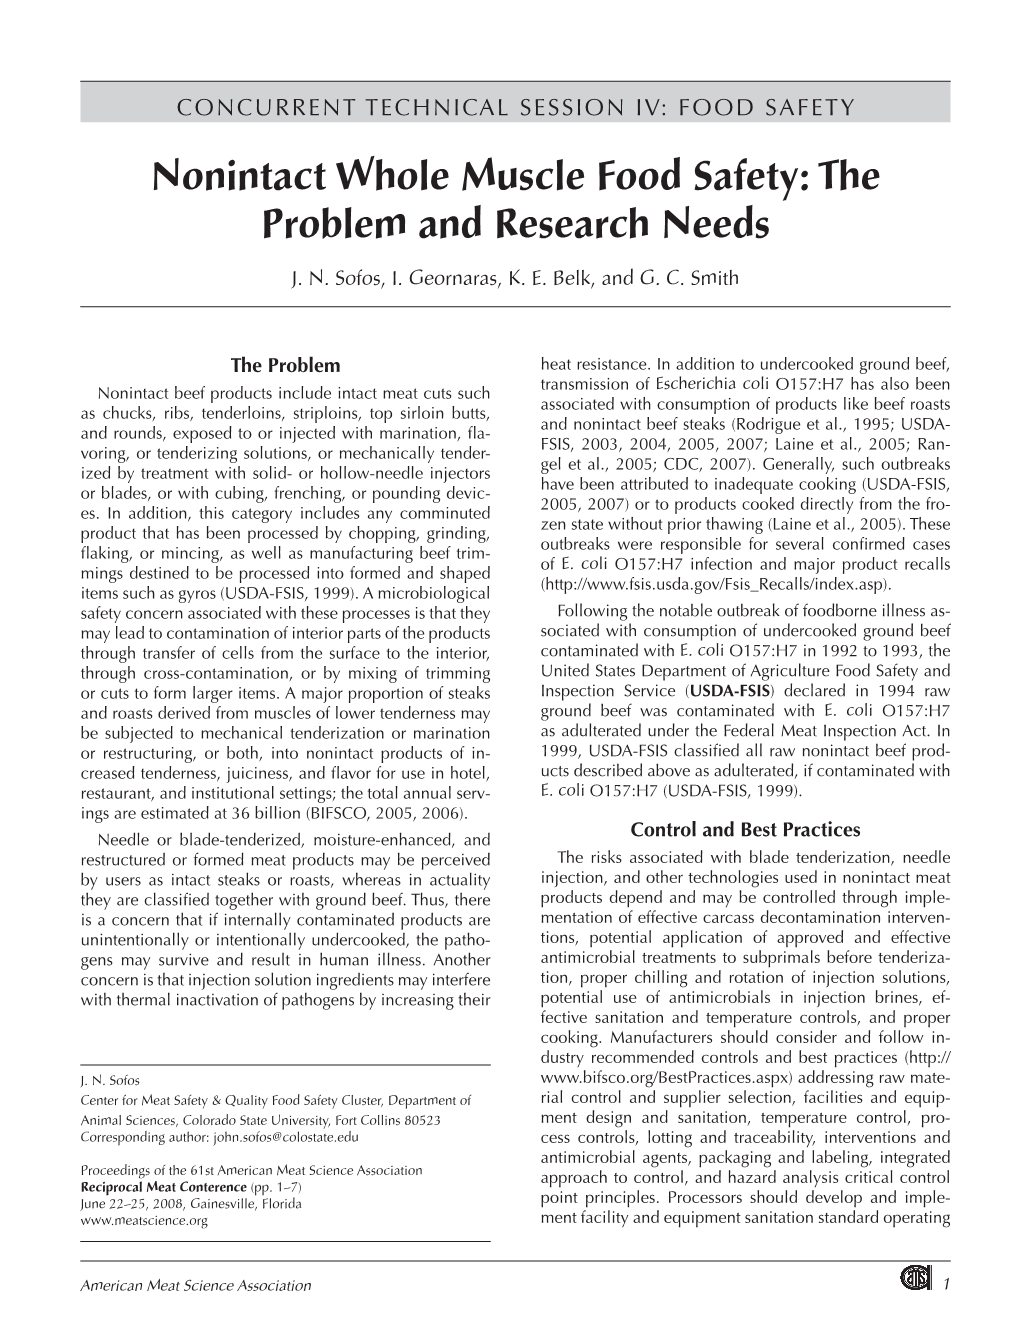 Nonintact Whole Muscle Food Safety: the Problem and Research Needs